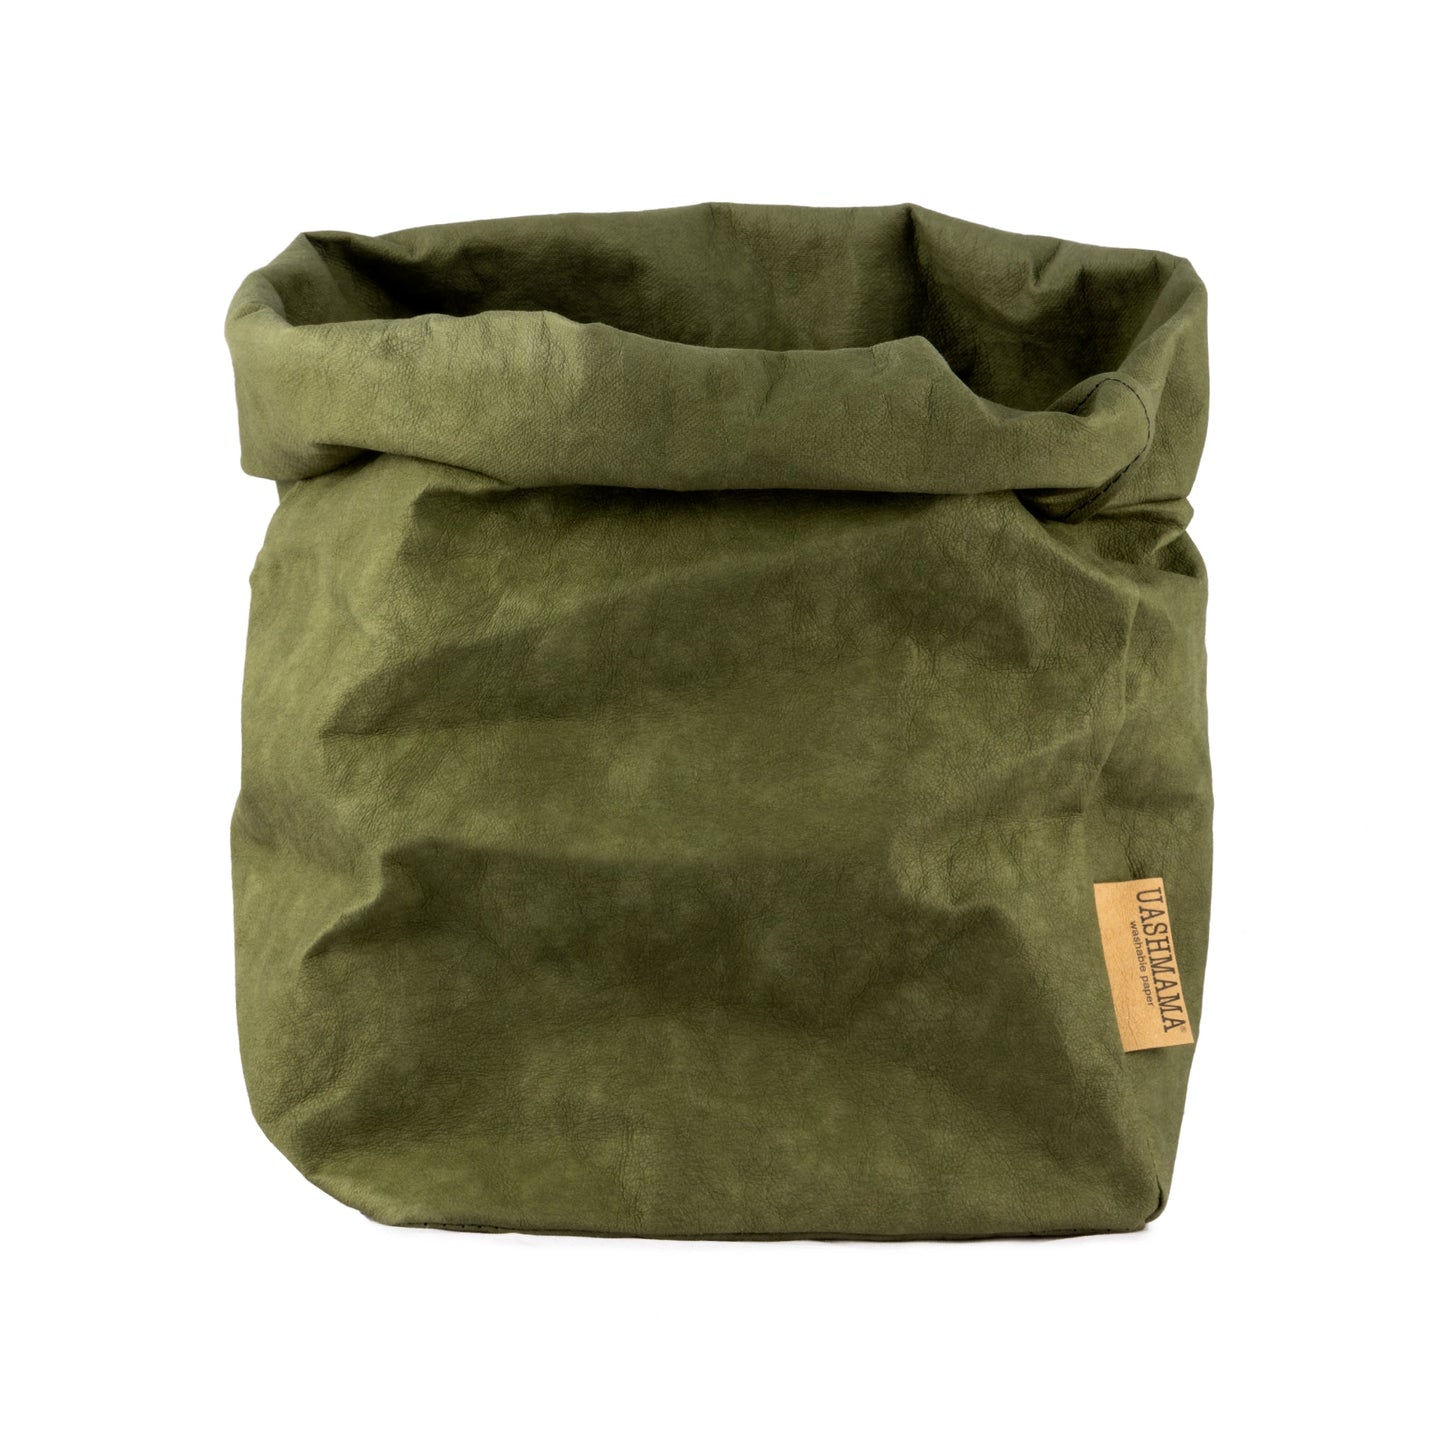 A washable paper bag is shown. The bag is rolled down at the top and features a UASHMAMA logo label on the bottom left corner. The bag pictured is the large plus size in dark green.